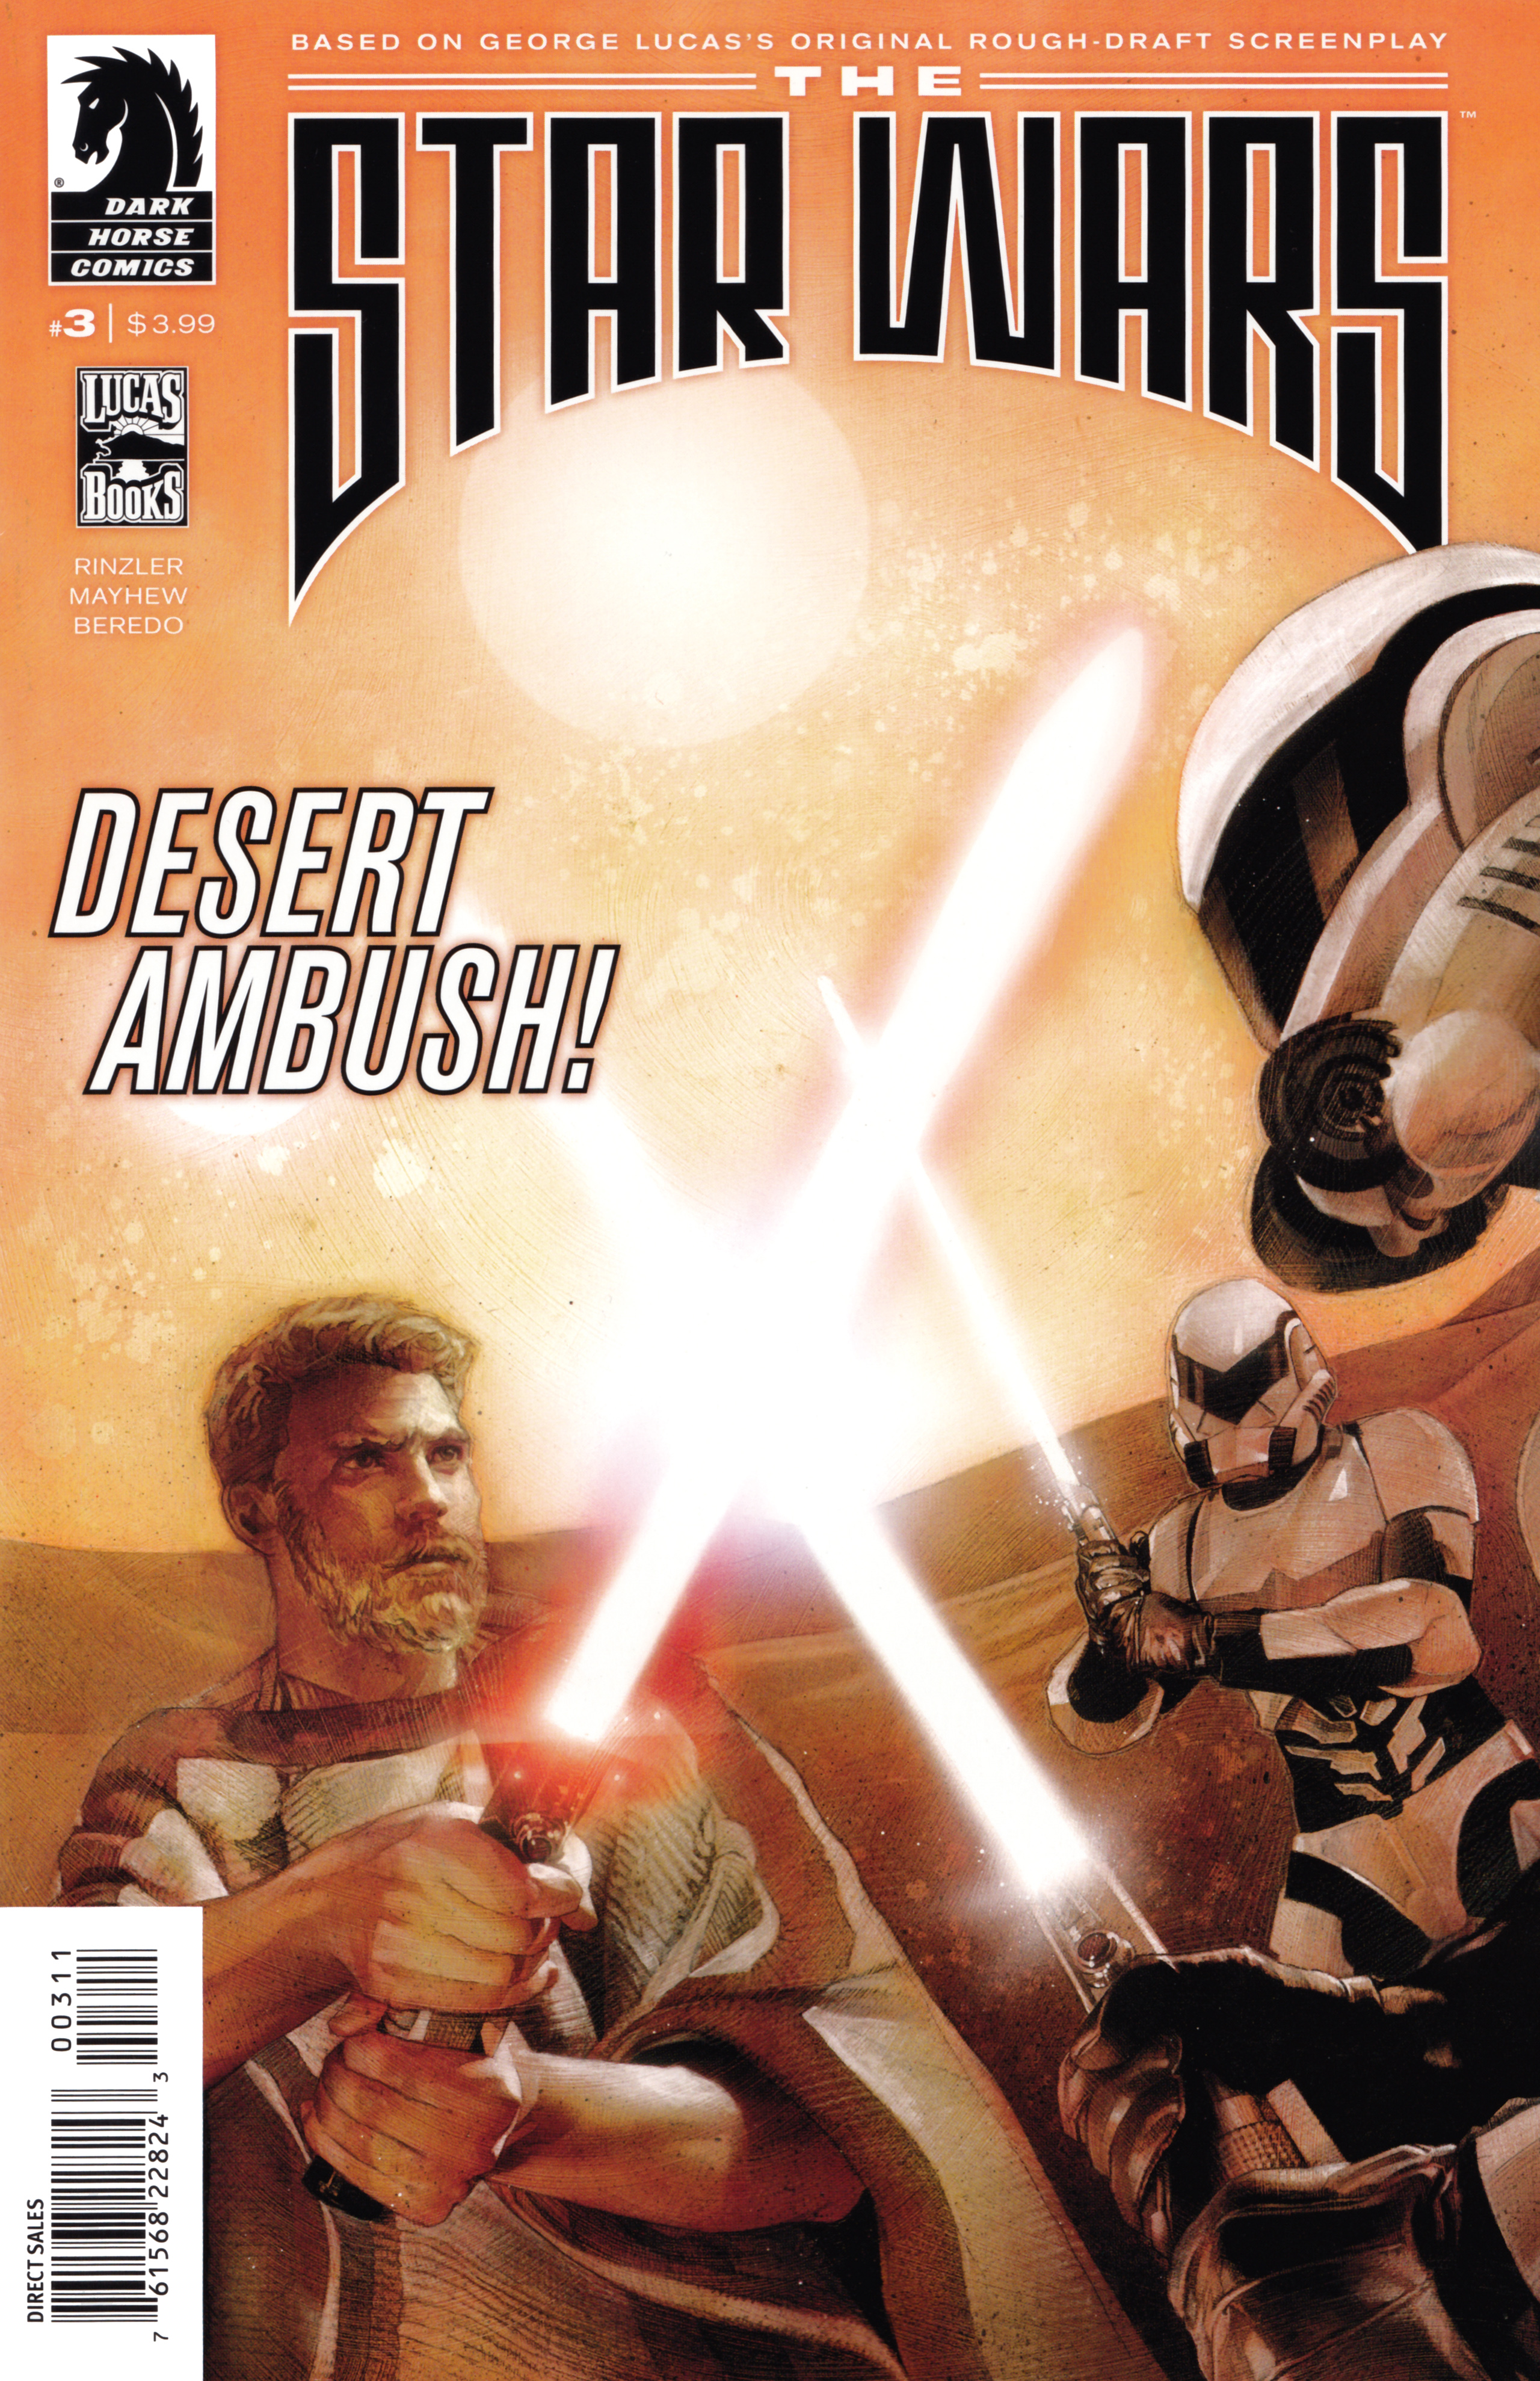 Read online The Star Wars comic -  Issue #3 - 1